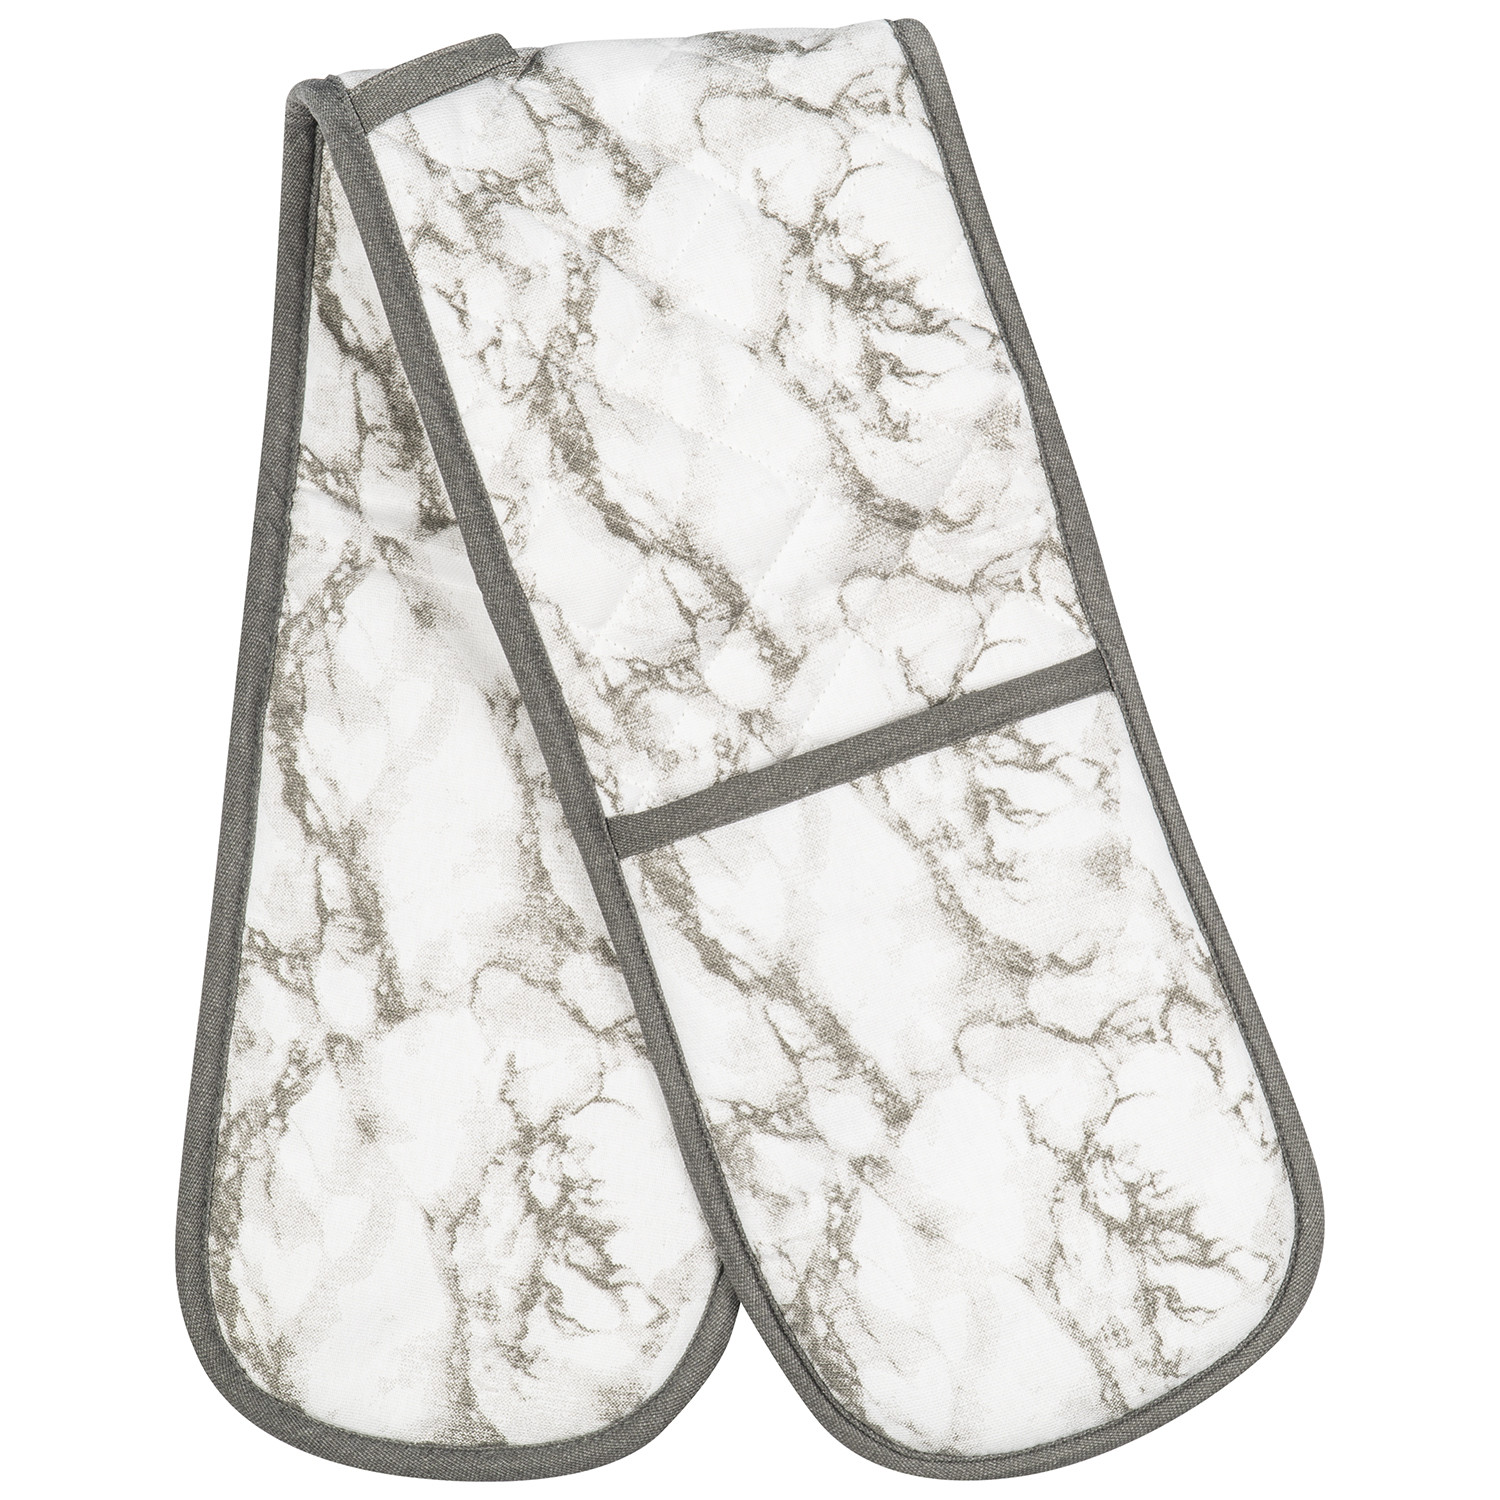 Brown Marble Effect Double Oven Glove Image